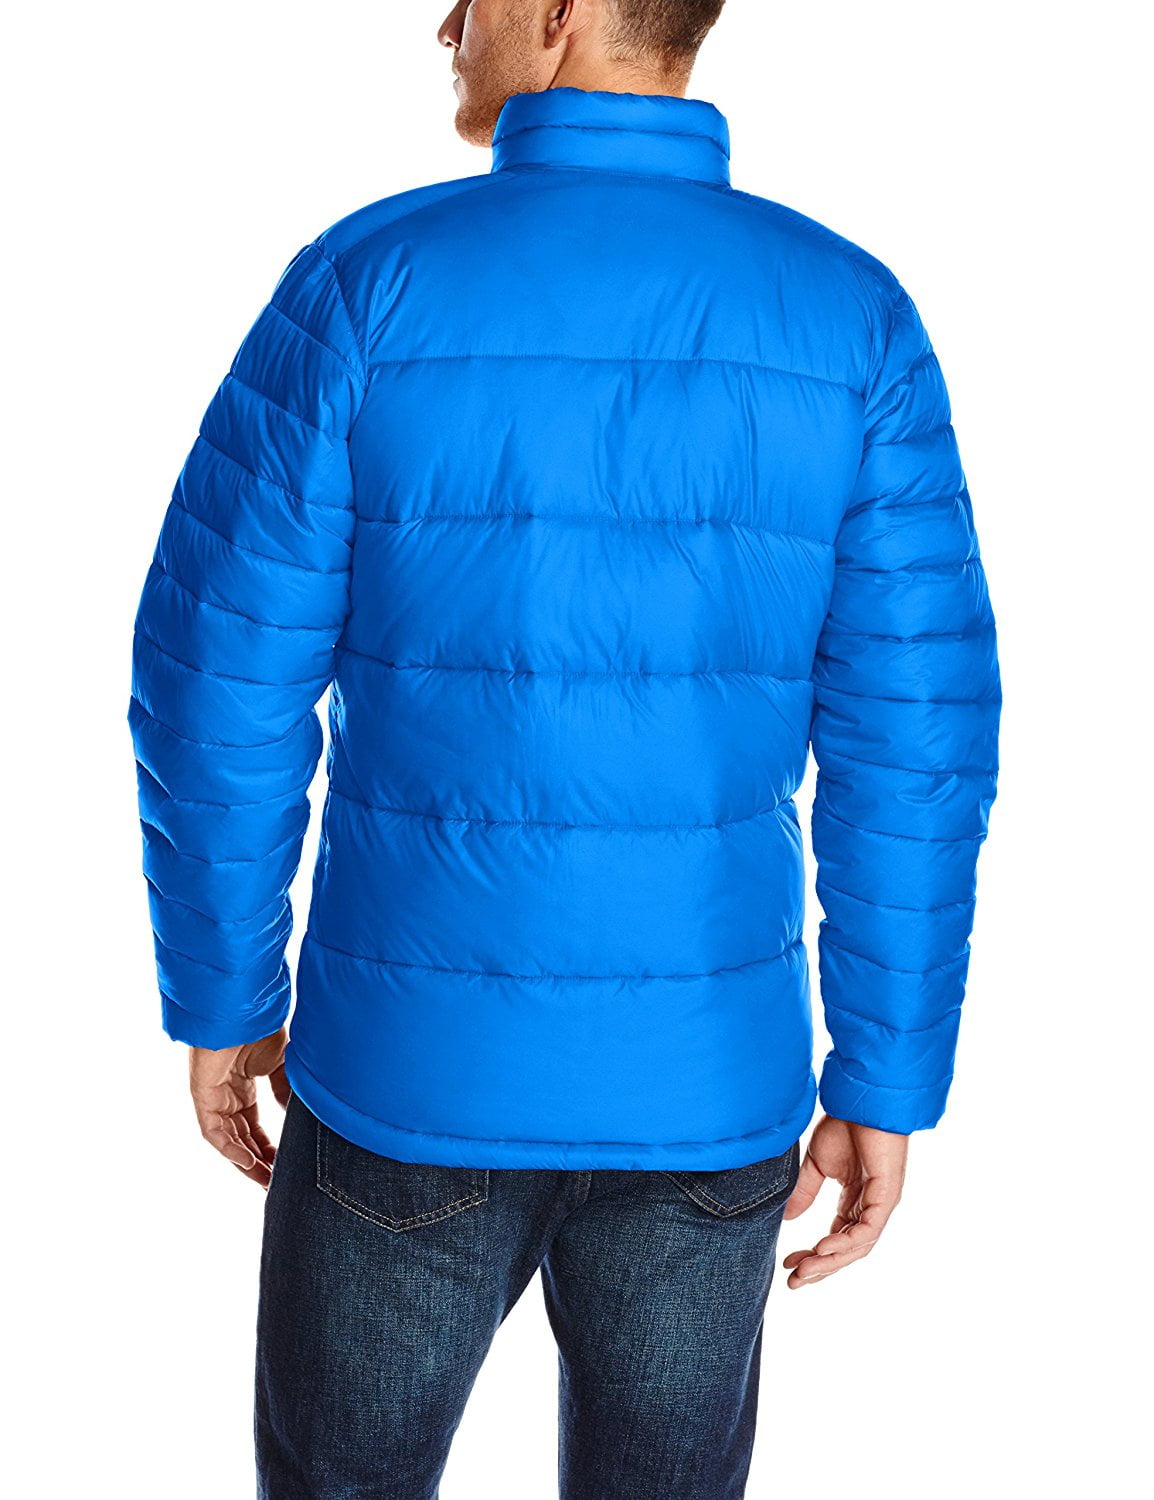 columbia men's frost fighter insulated jacket